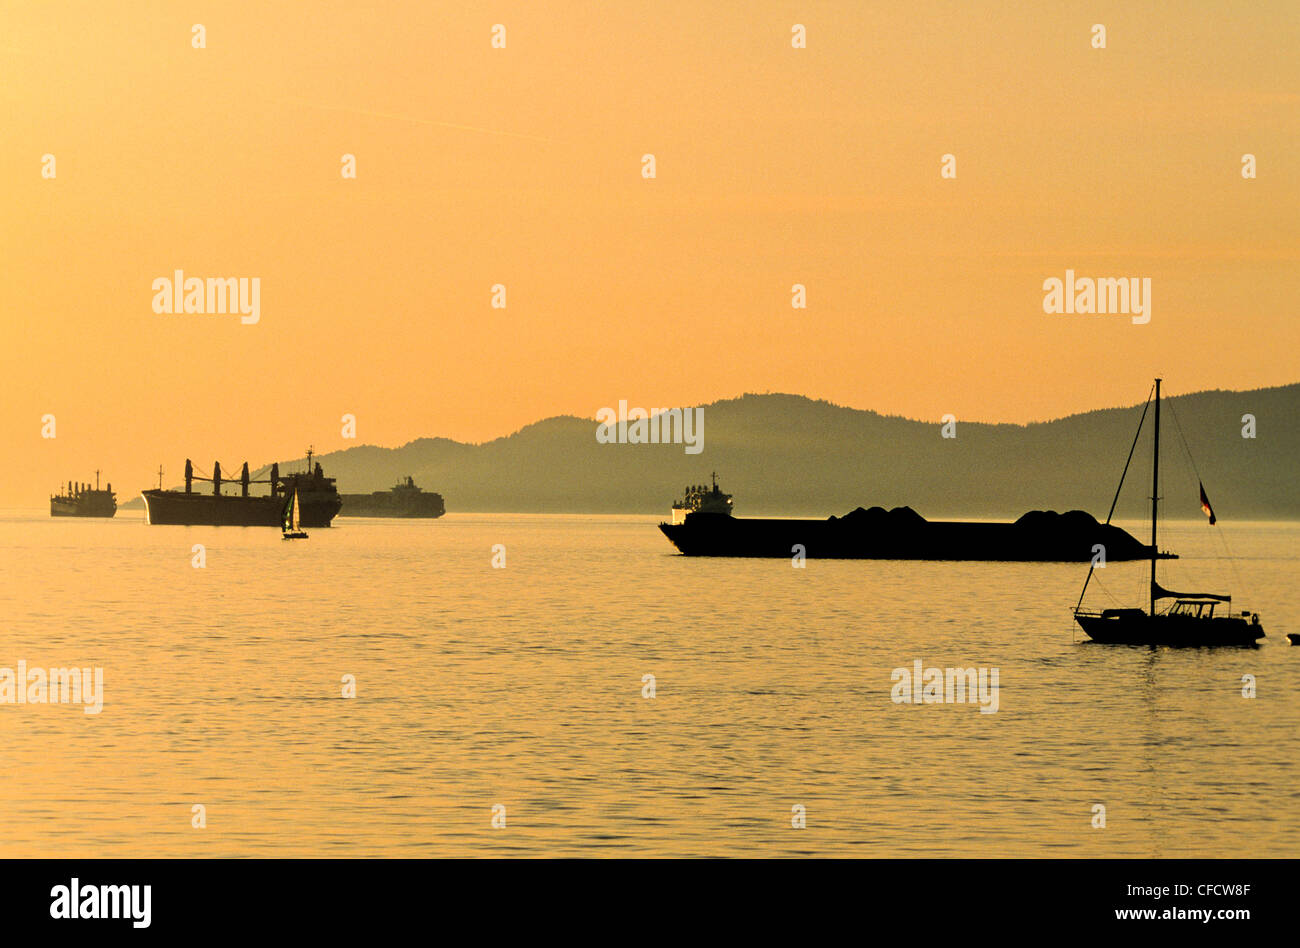 Ships in sunset, English Bay, Vancouver, British Columbia, Canada Stock Photo